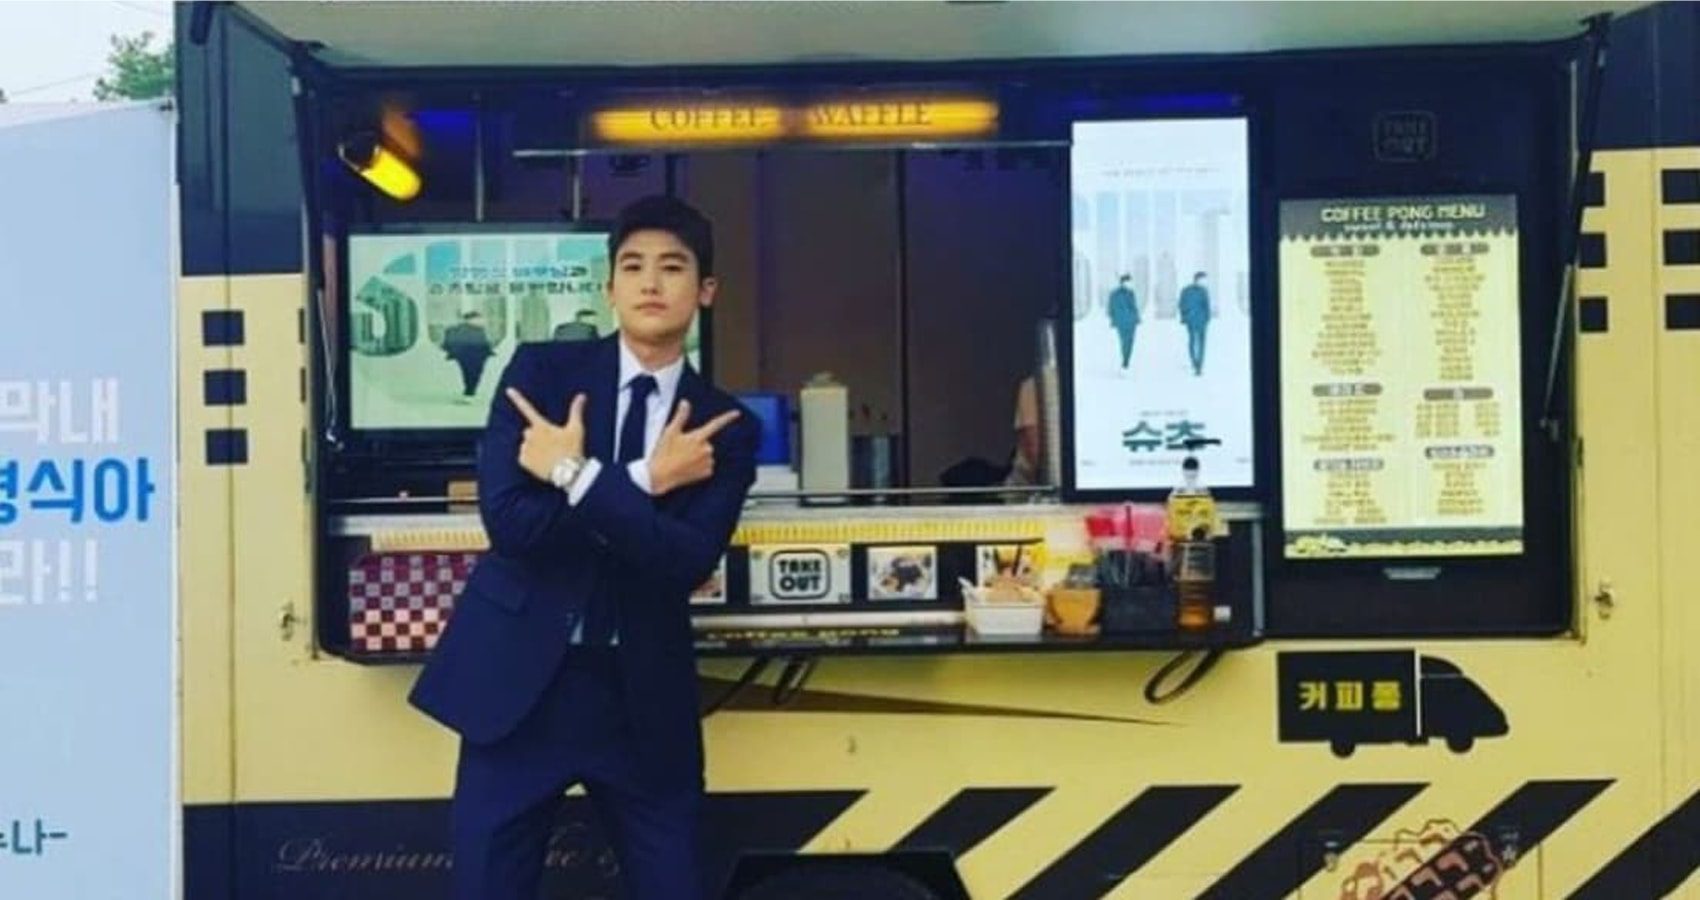 Park Hyung-Sik posing in front of the food truck